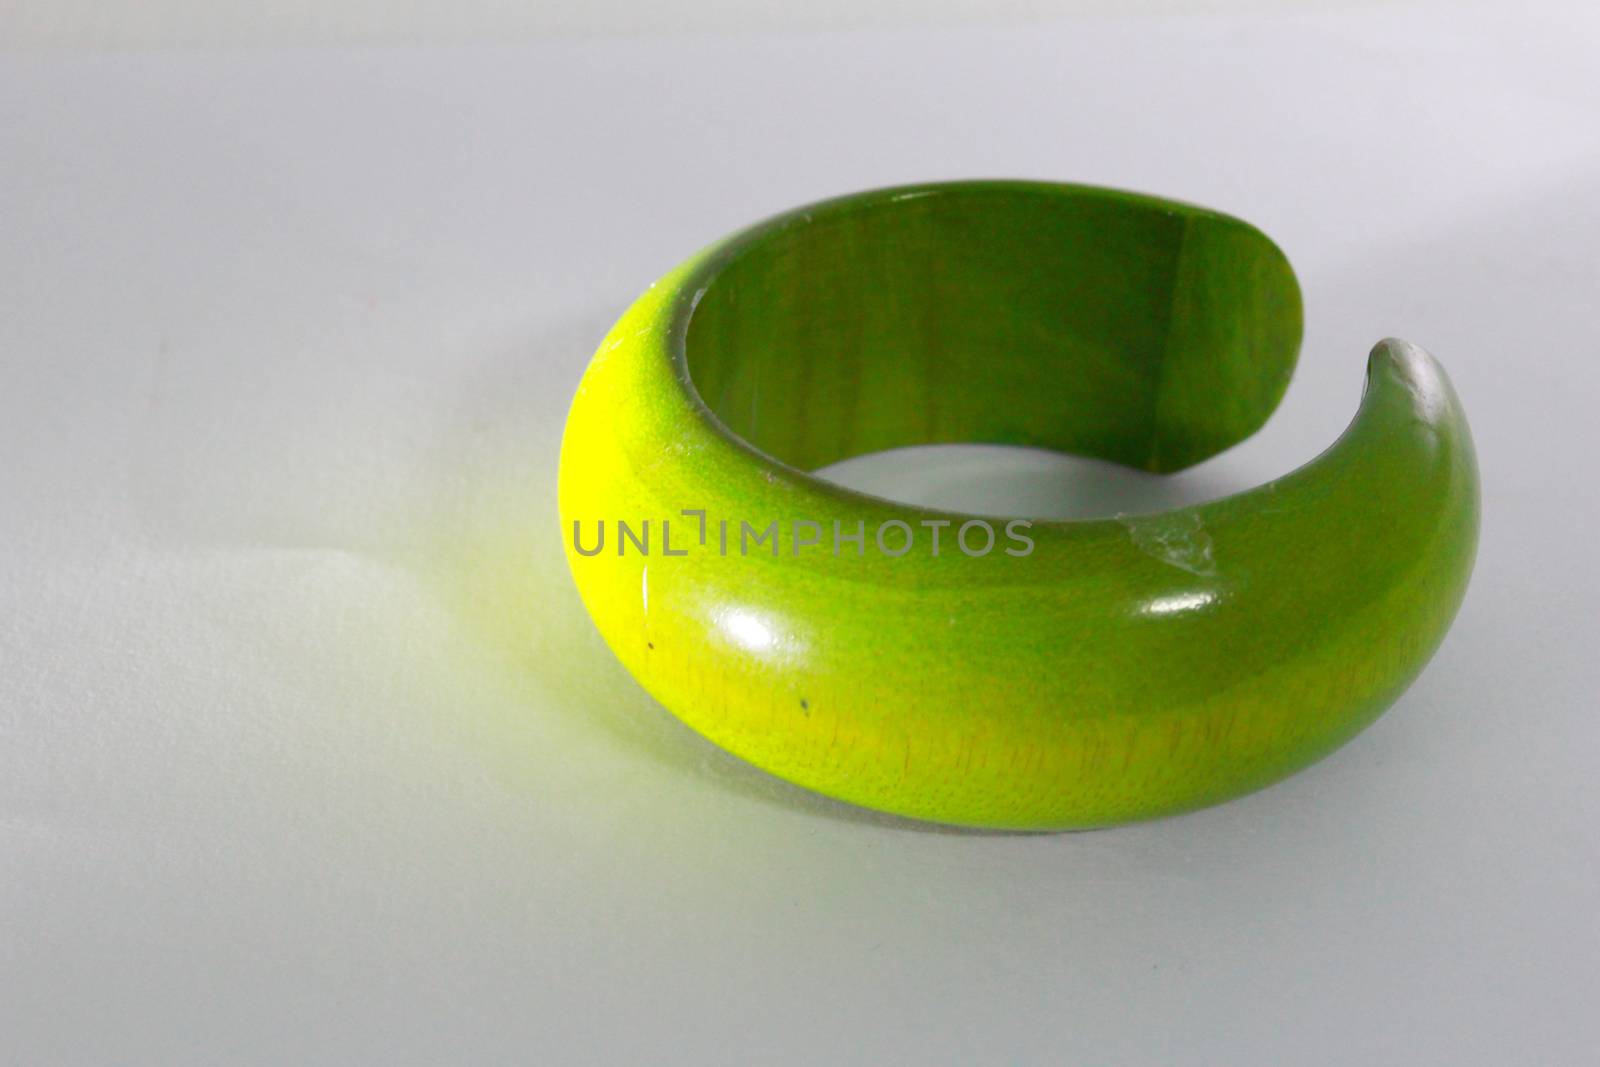 The green wooden bangle.It is very heavy but beautiful.